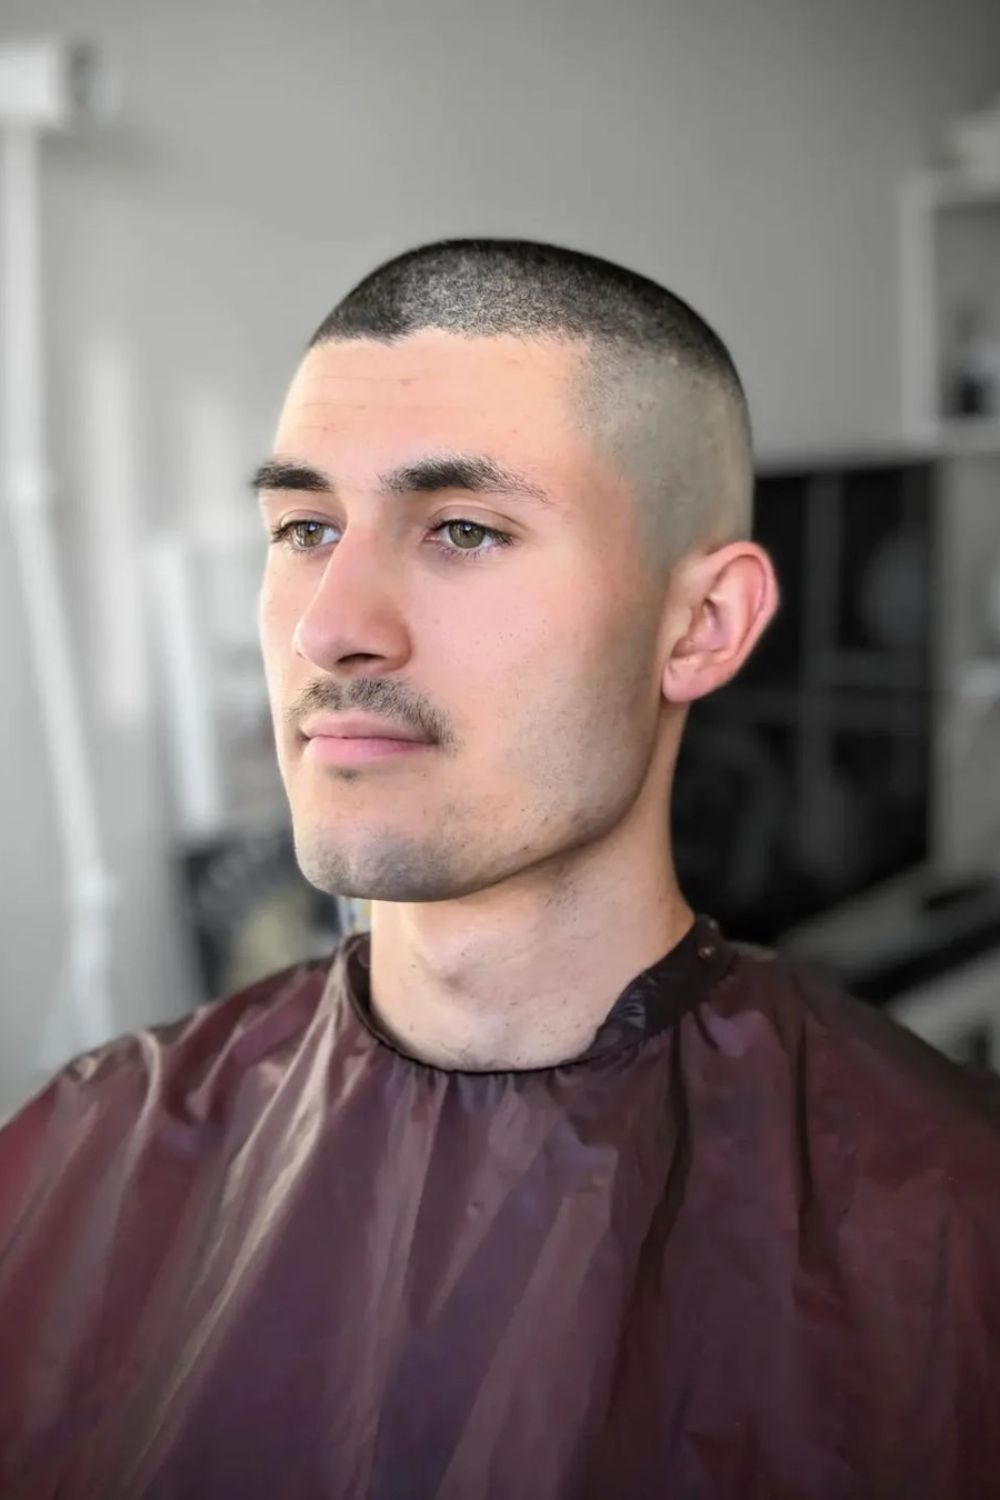 A man with a high and tight haircut.